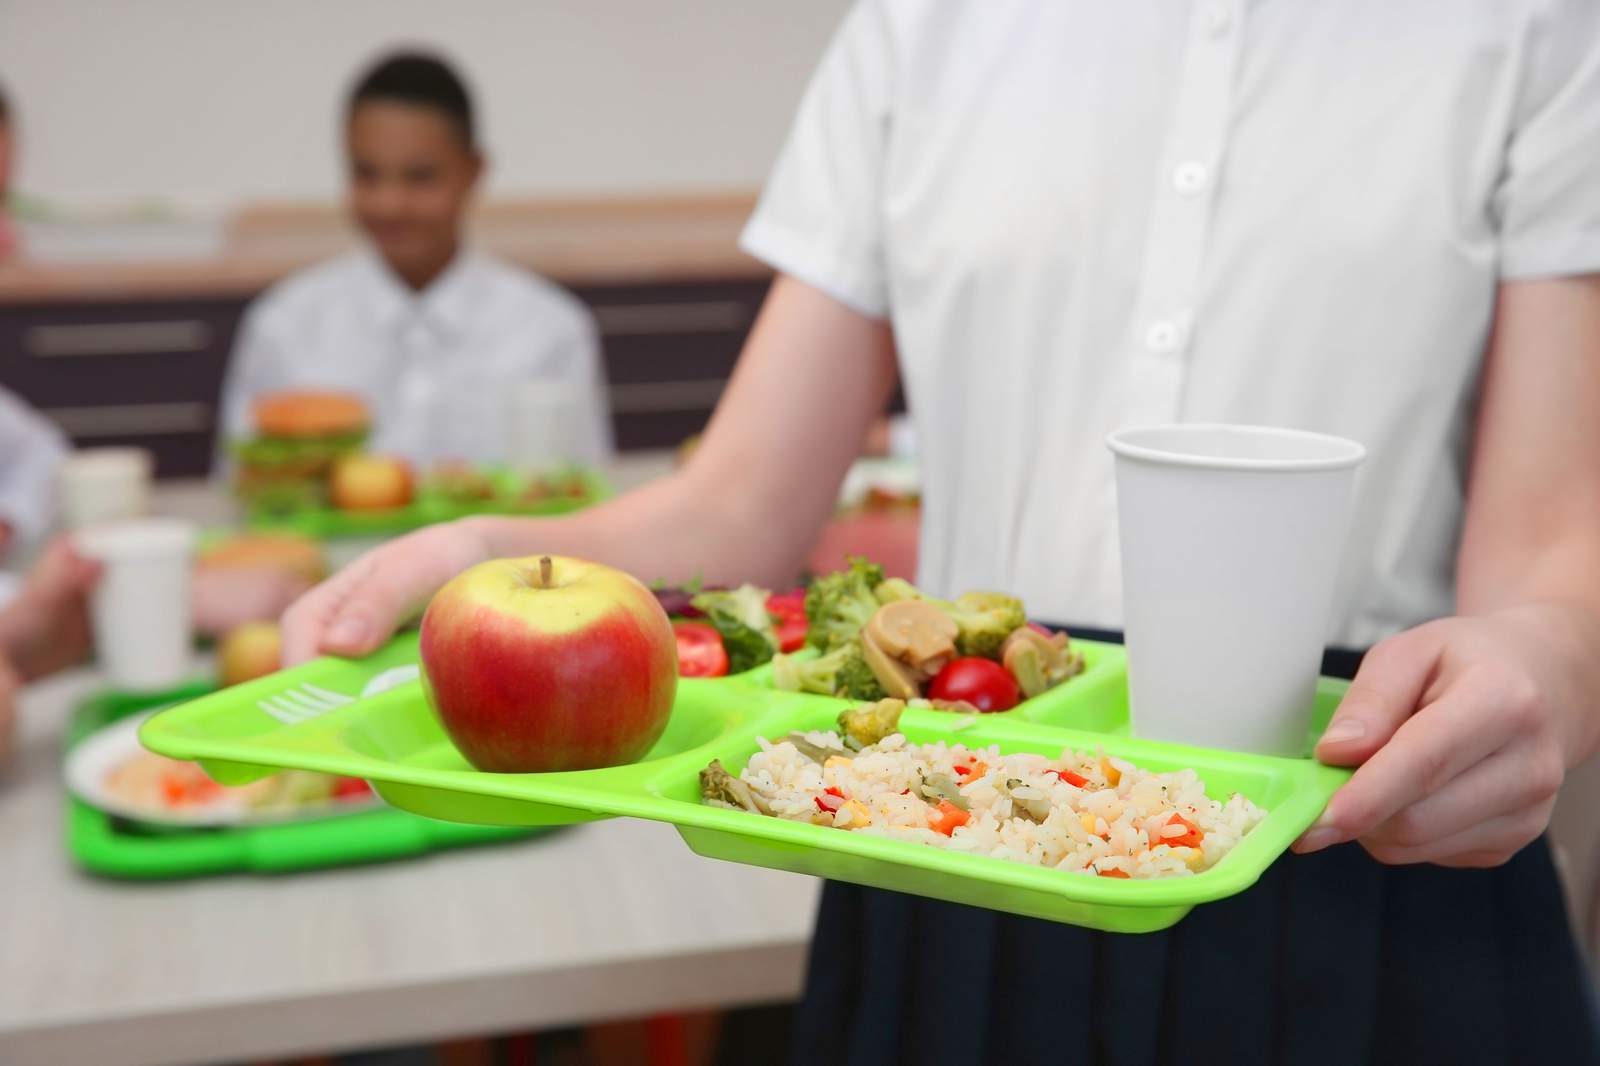 With coronavirus closing schools, here’s how you can help food insecure children